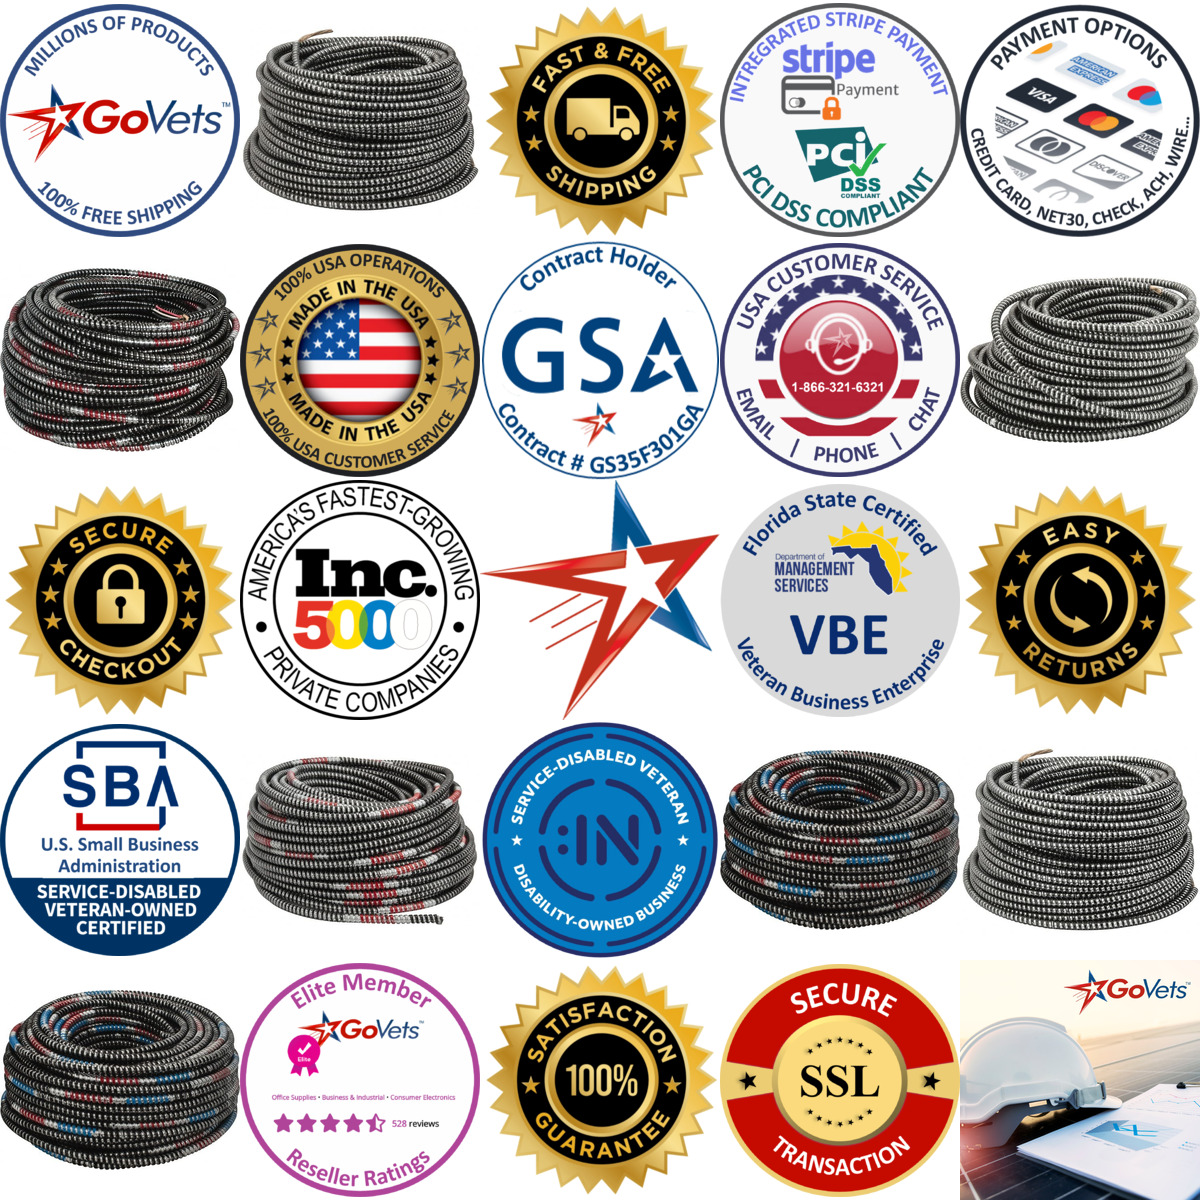 A selection of Afc Cable products on GoVets